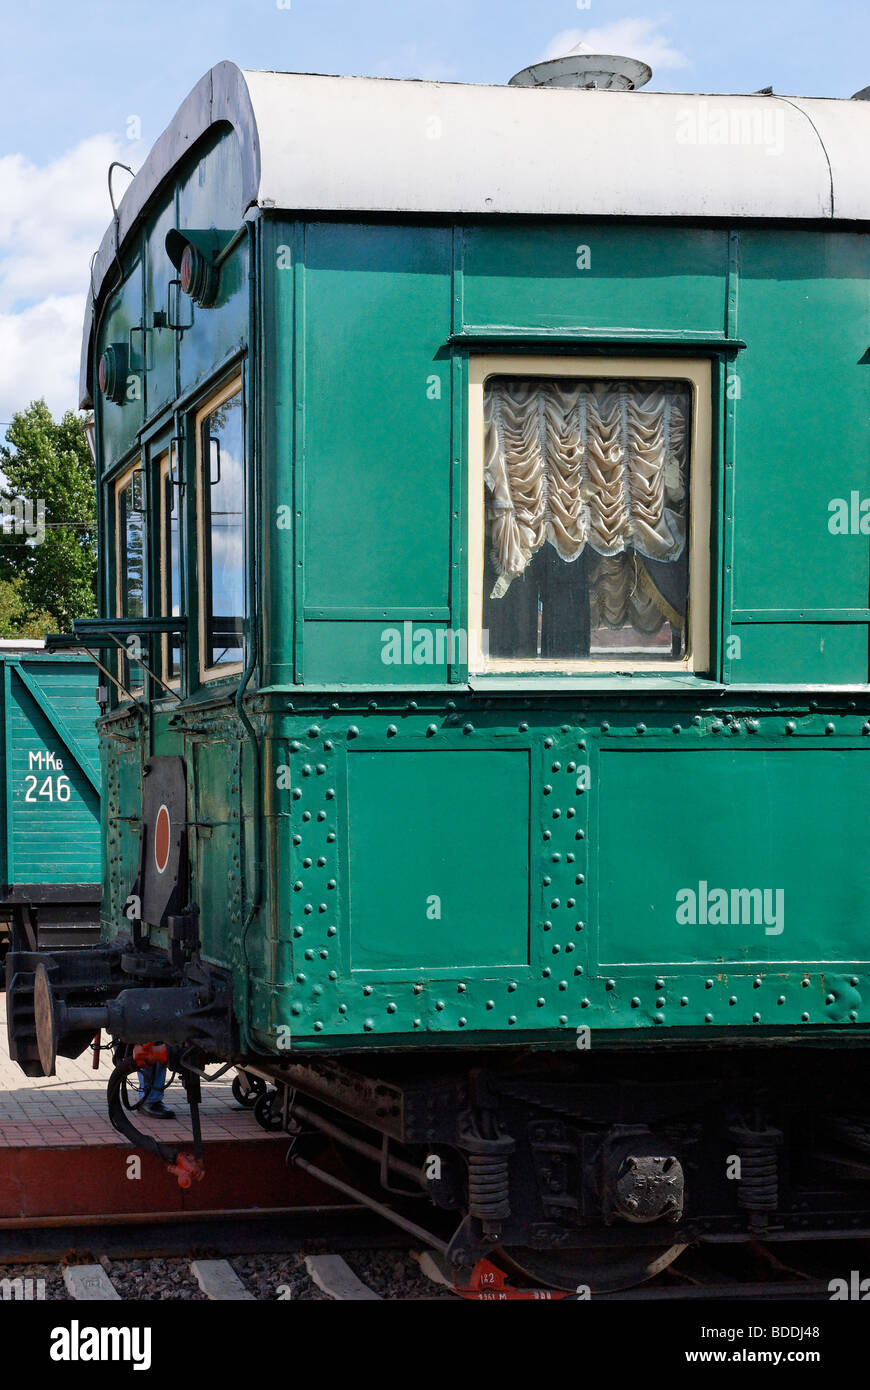 An old governmental train car for the Soviet leaders as an exhibit in Moscow railway museum Stock Photo